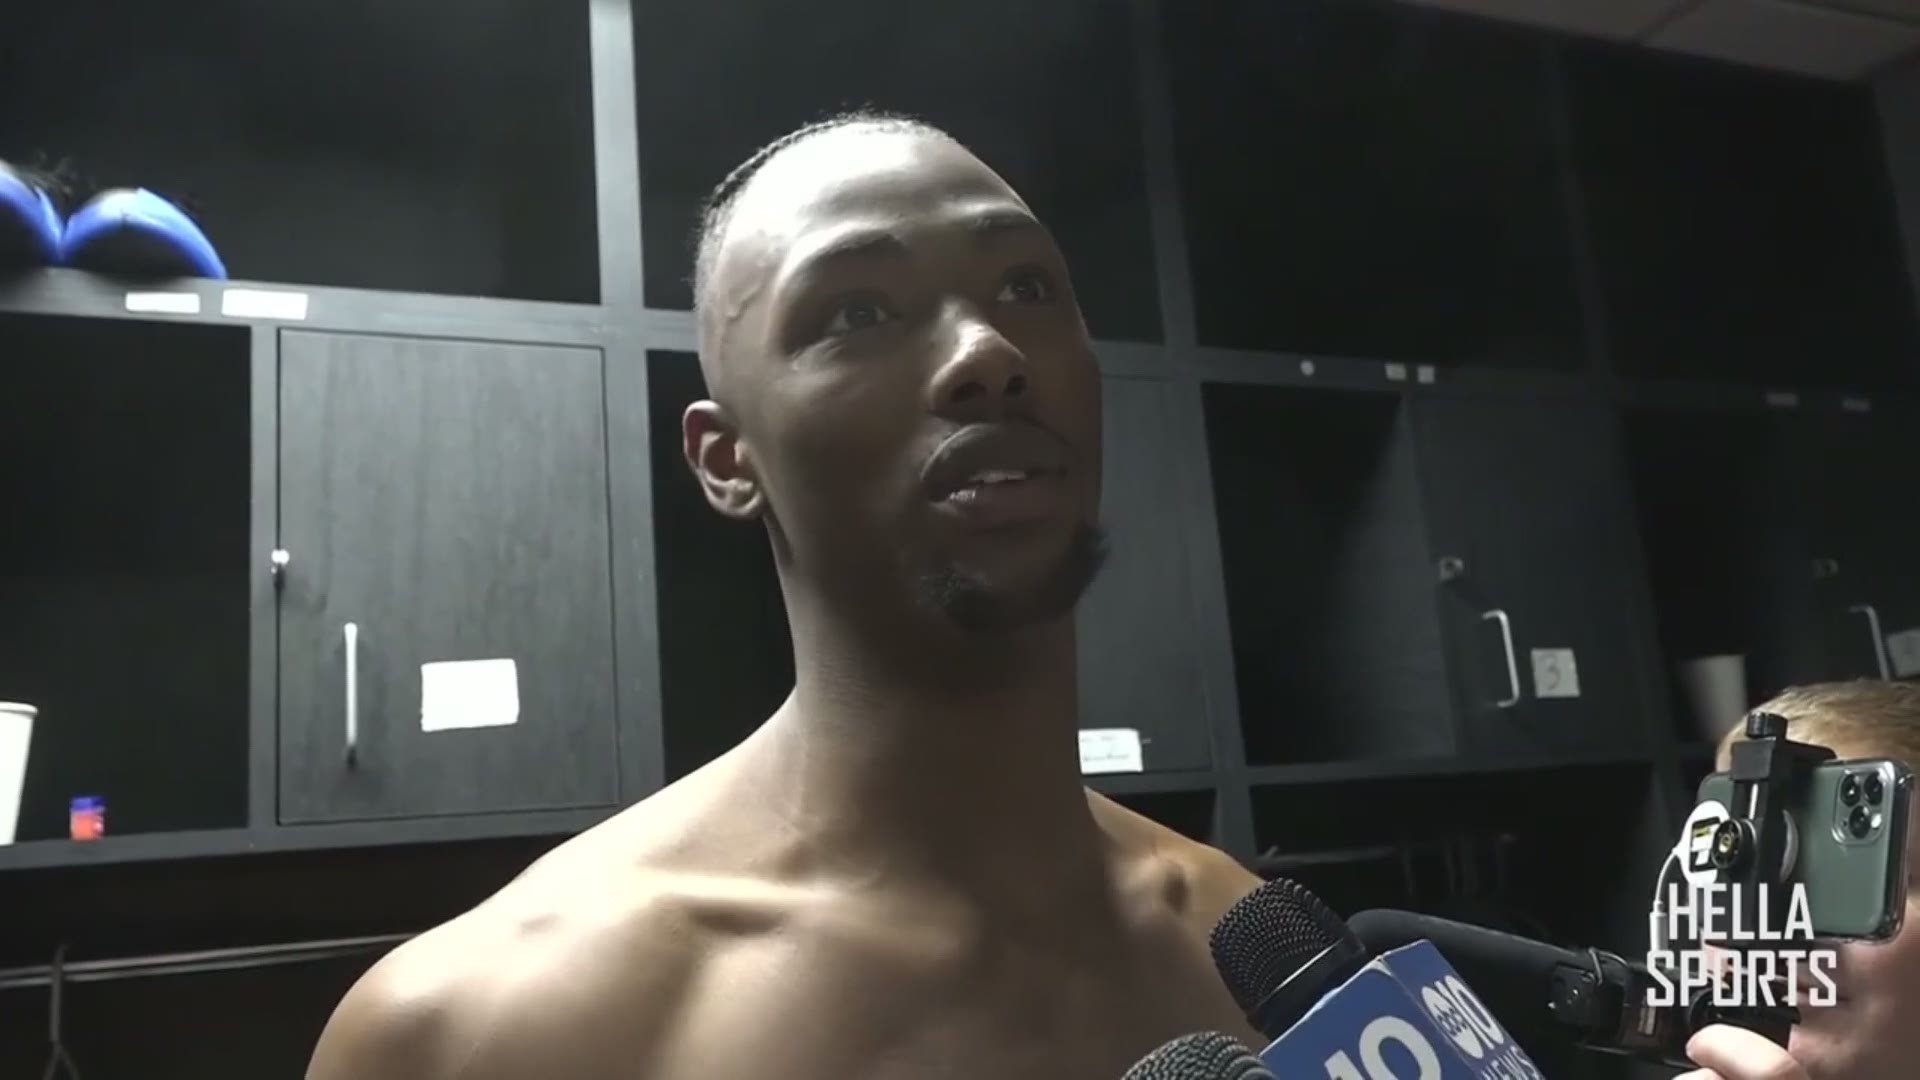 Sacramento Kings' center Harry Giles III talks about recording his first NBA career double-double in Saturday's 112-103 victory in Los Angeles over the Clippers.